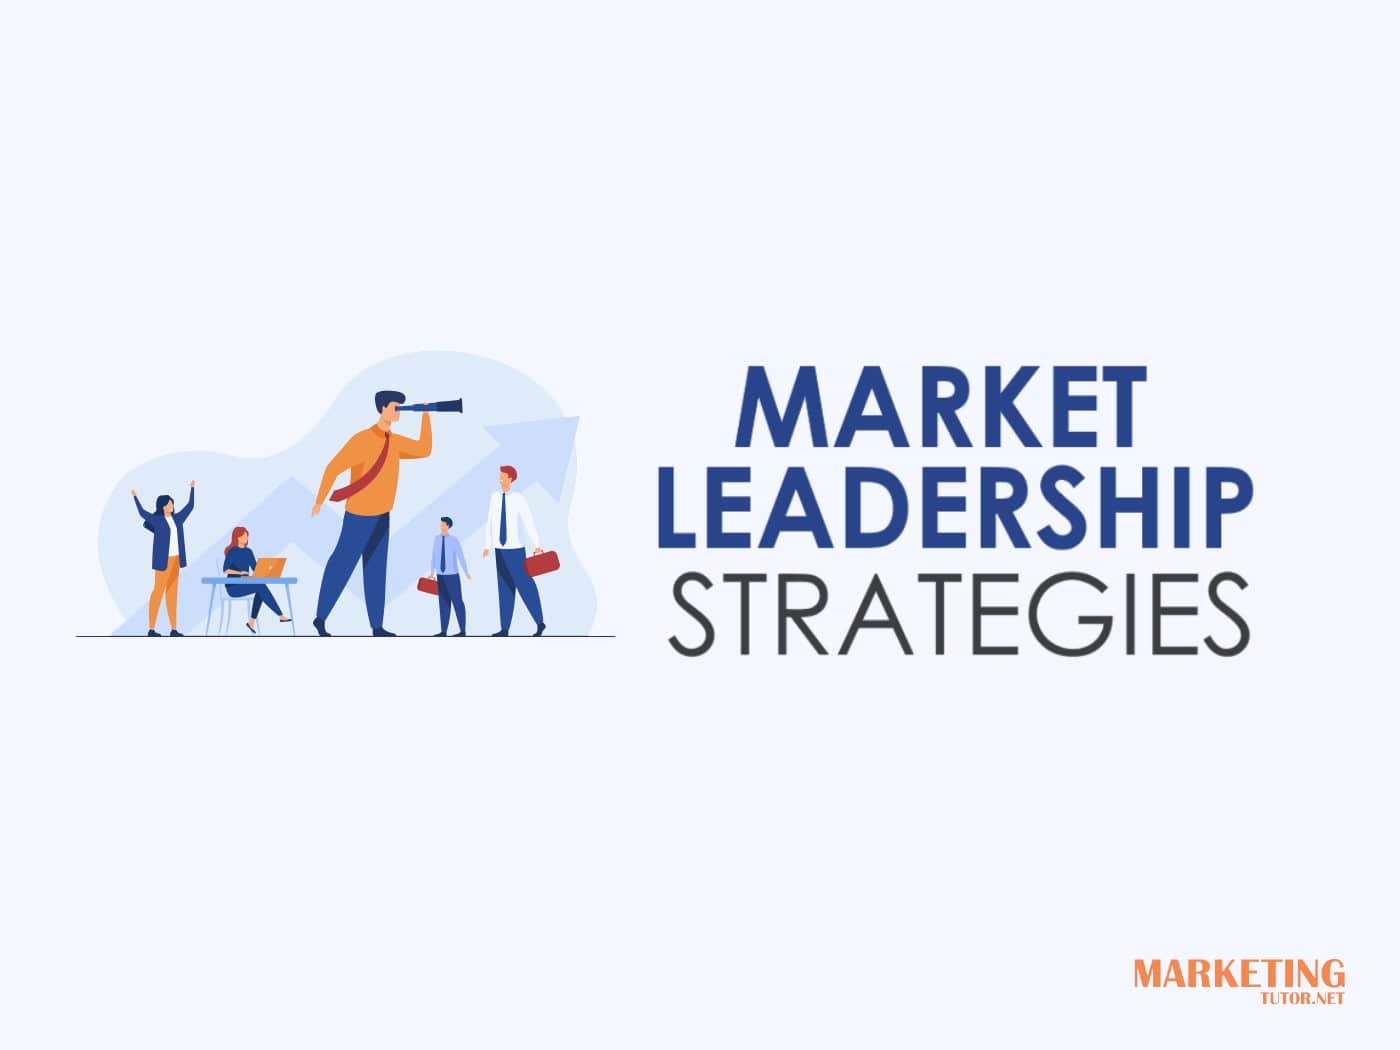 Strategy 2 Understanding Flanking Defense The Market Leaders Guide To  Dominating Your Industry Strategy SS V